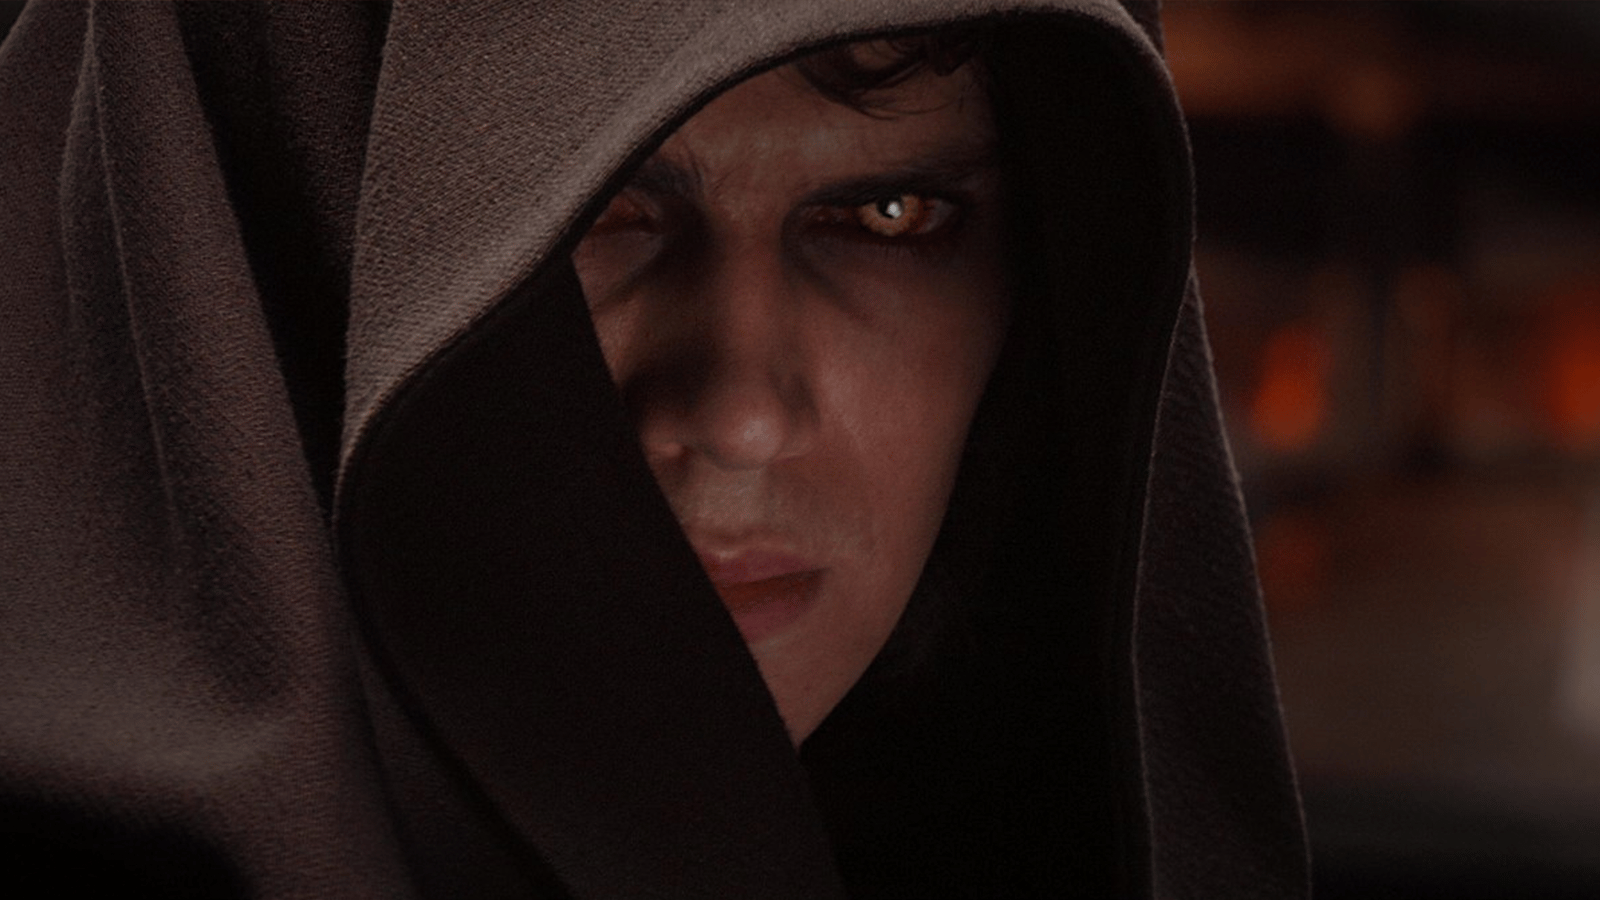 Anakin Skywalker falls to the dark side in Revenge of the Sith.